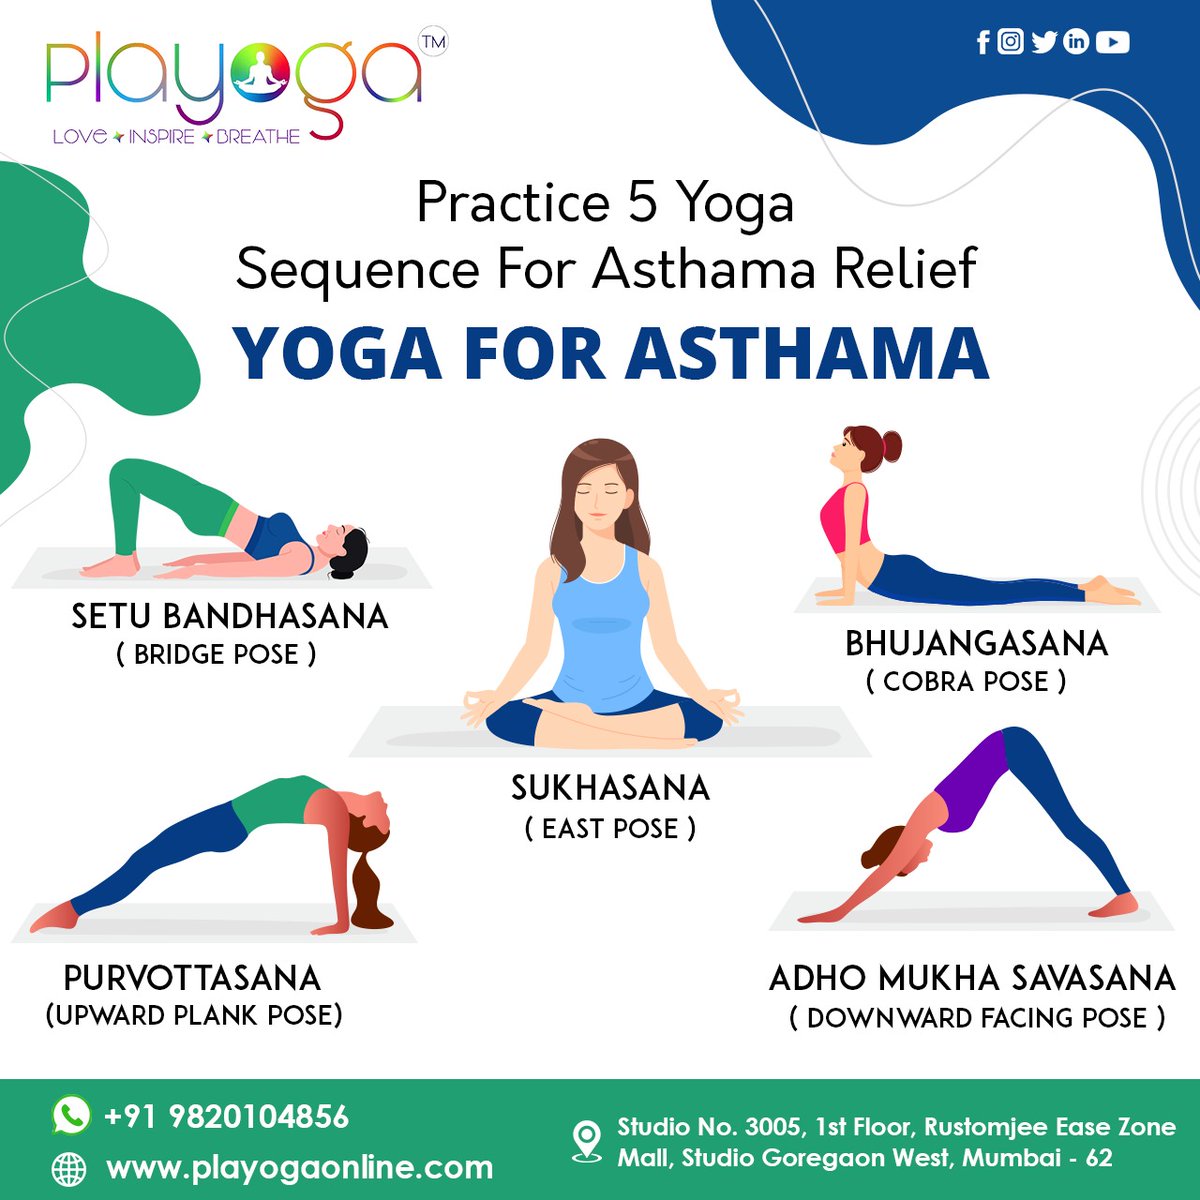 Yoga offers a combination of breathing exercises, postures, and relaxation techniques that can improve lung function, reduce stress and inflammation, and enhance overall well-being for Asthama.  #Playoga #yogaforasthma #asthmayoga #breathingexercises #pranayama #asthmatichealth